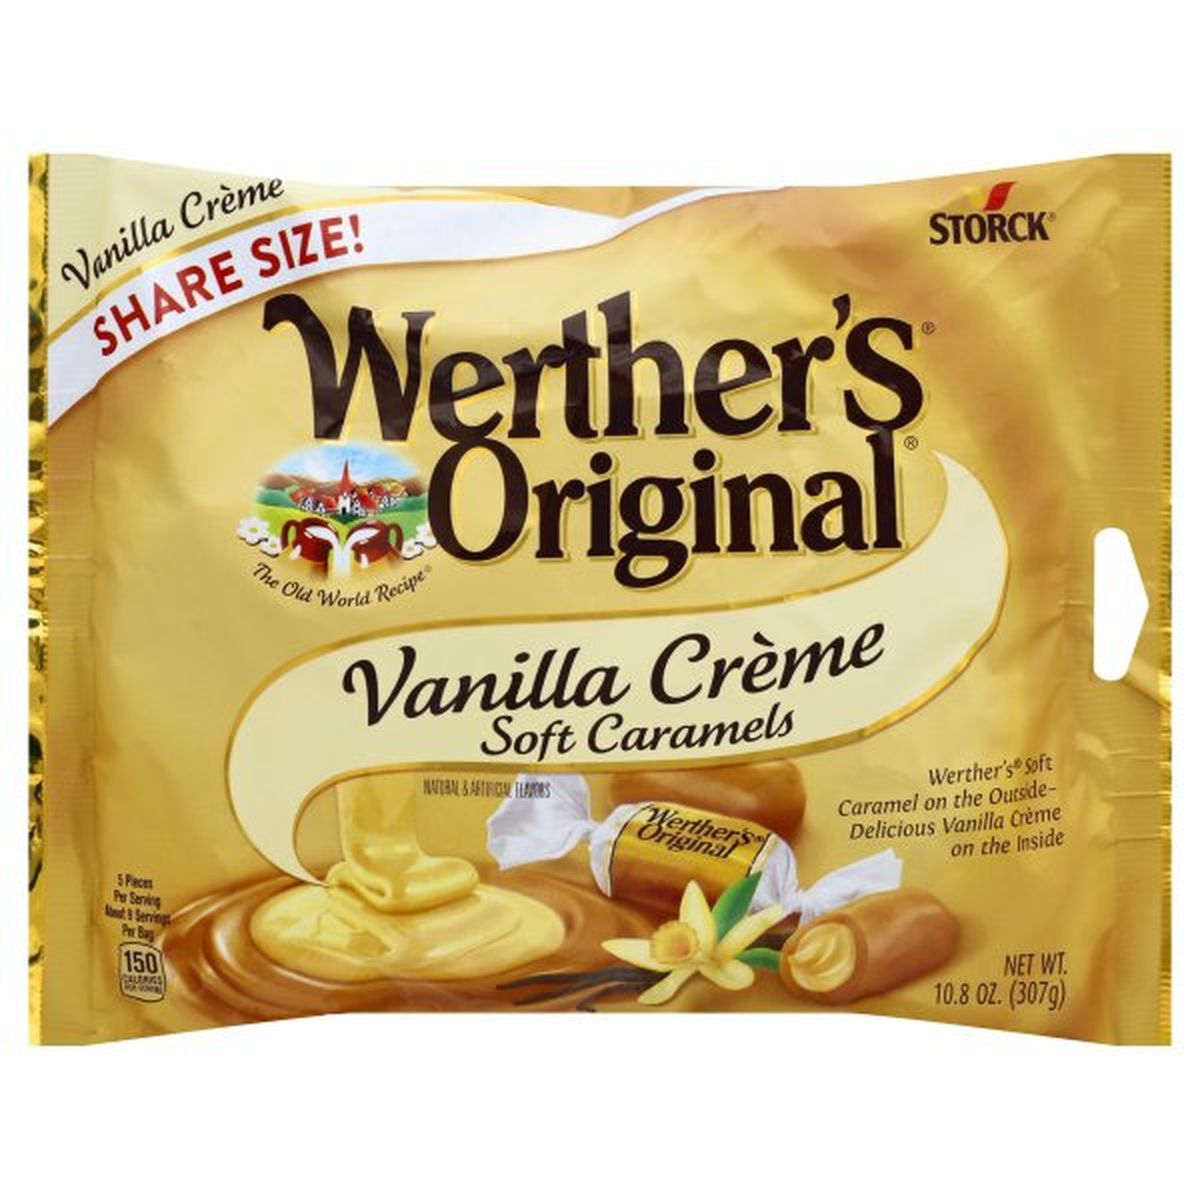 Calories in Werther's Original Soft Caramels, Vanilla Creme, Share Size